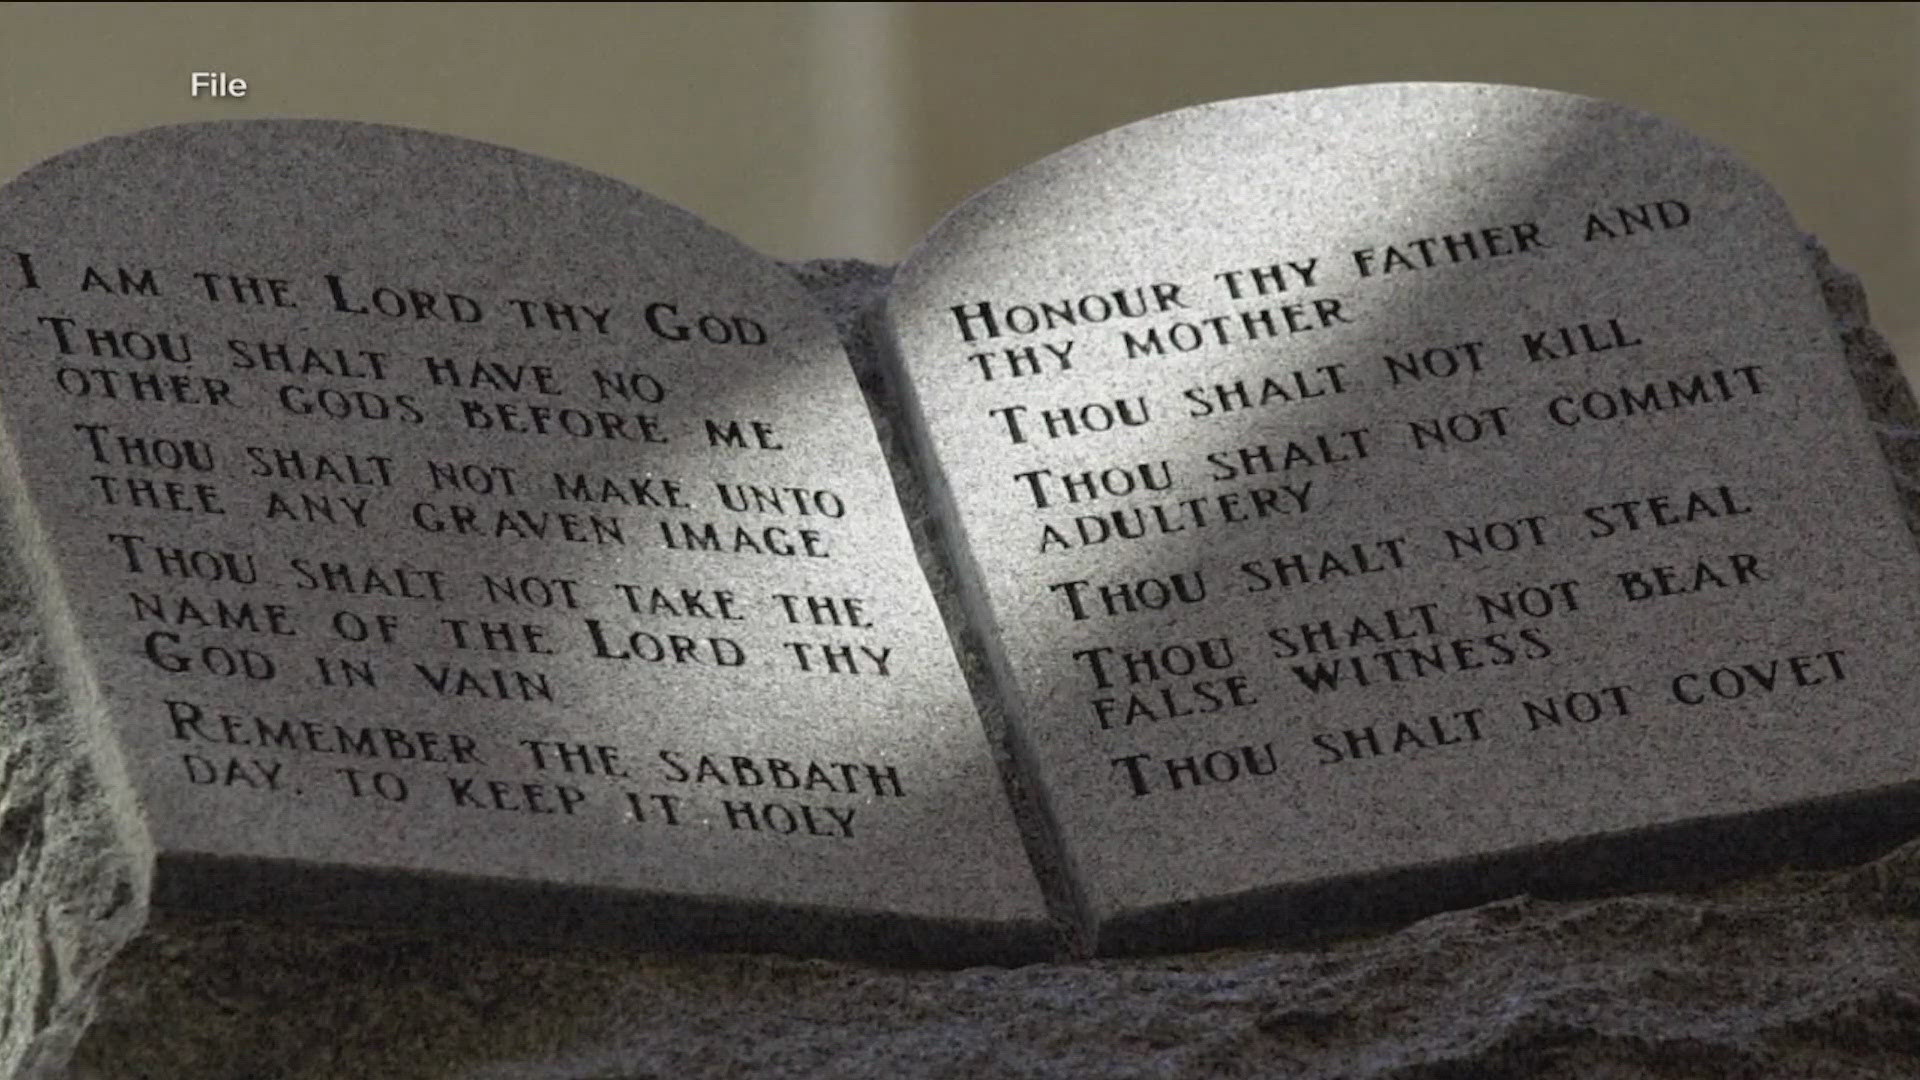 Schools in Louisiana will now be required to display the Ten Commandments in classrooms.